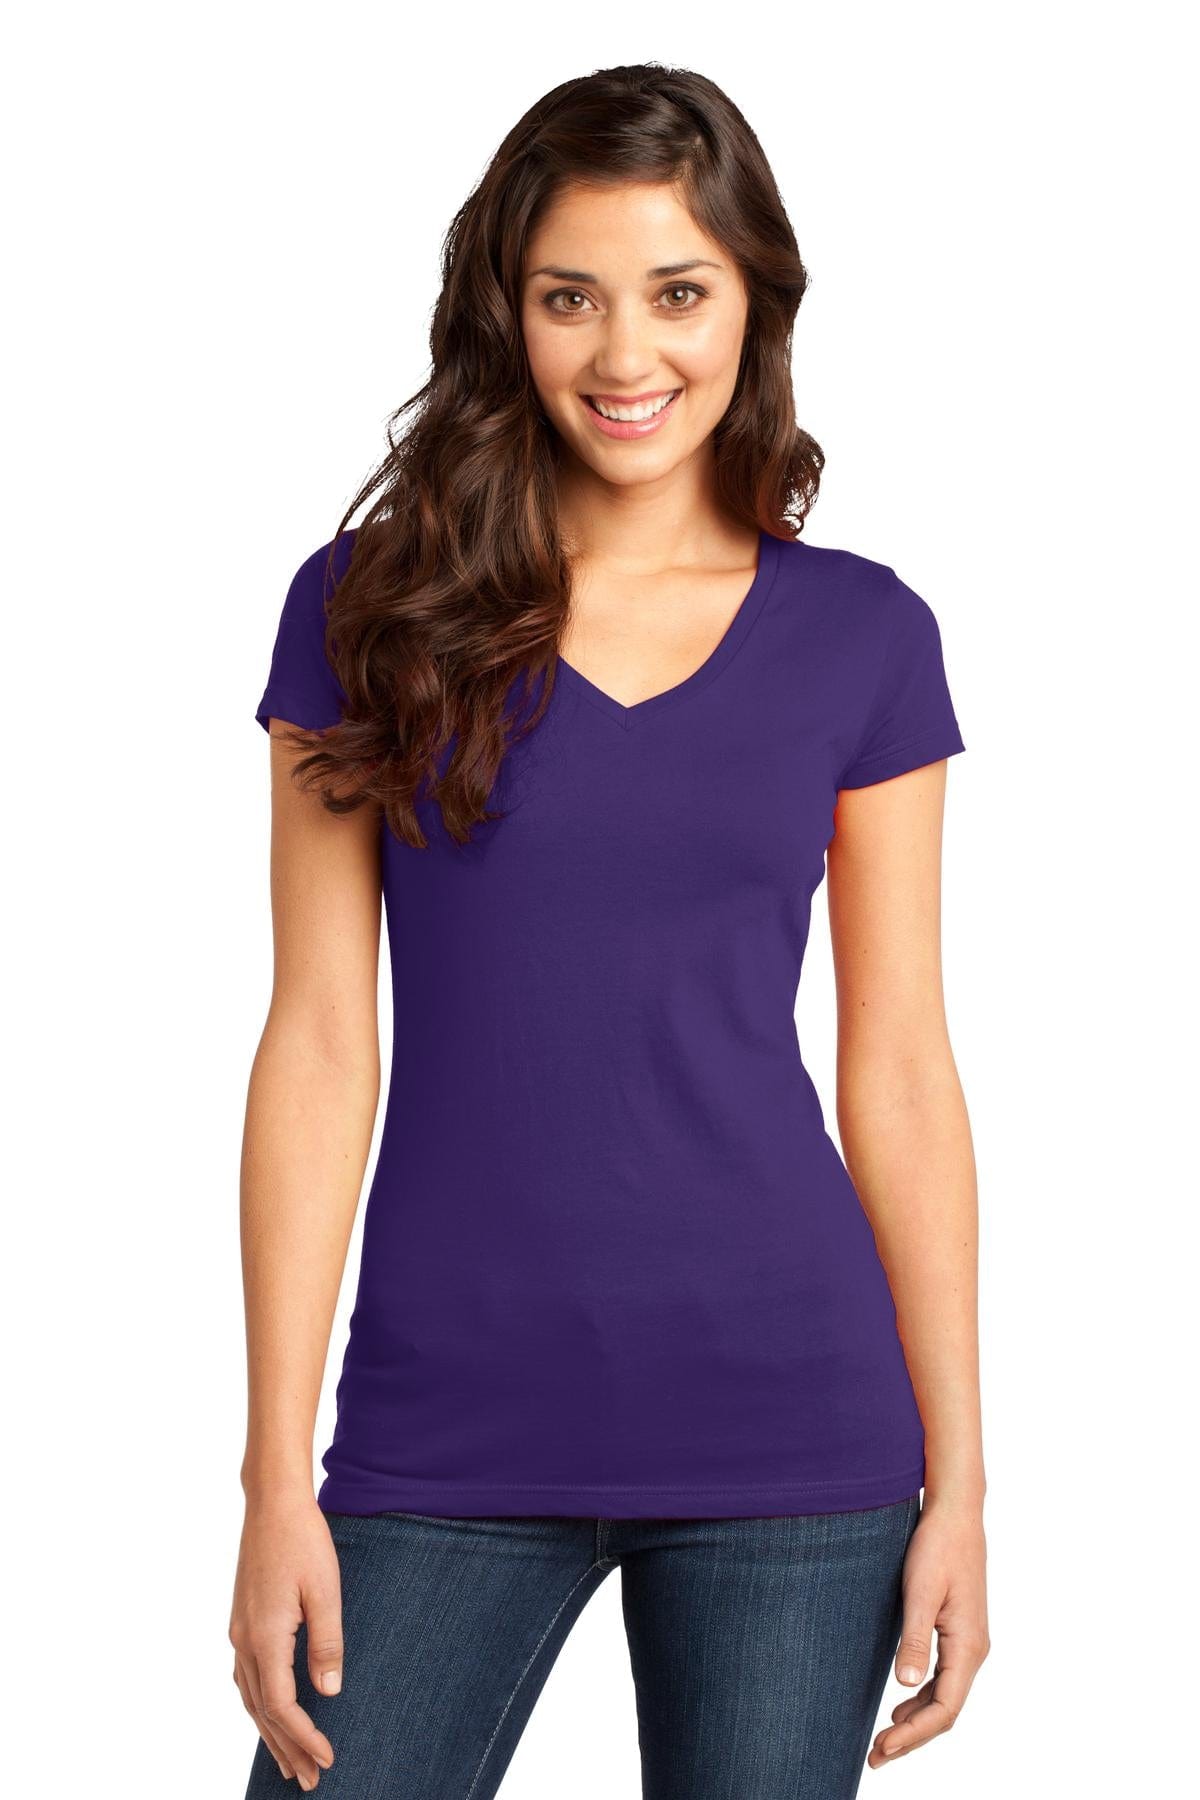 DISCONTINUED  District ®  - Juniors Very Important Tee ®  V-Neck. DT6501